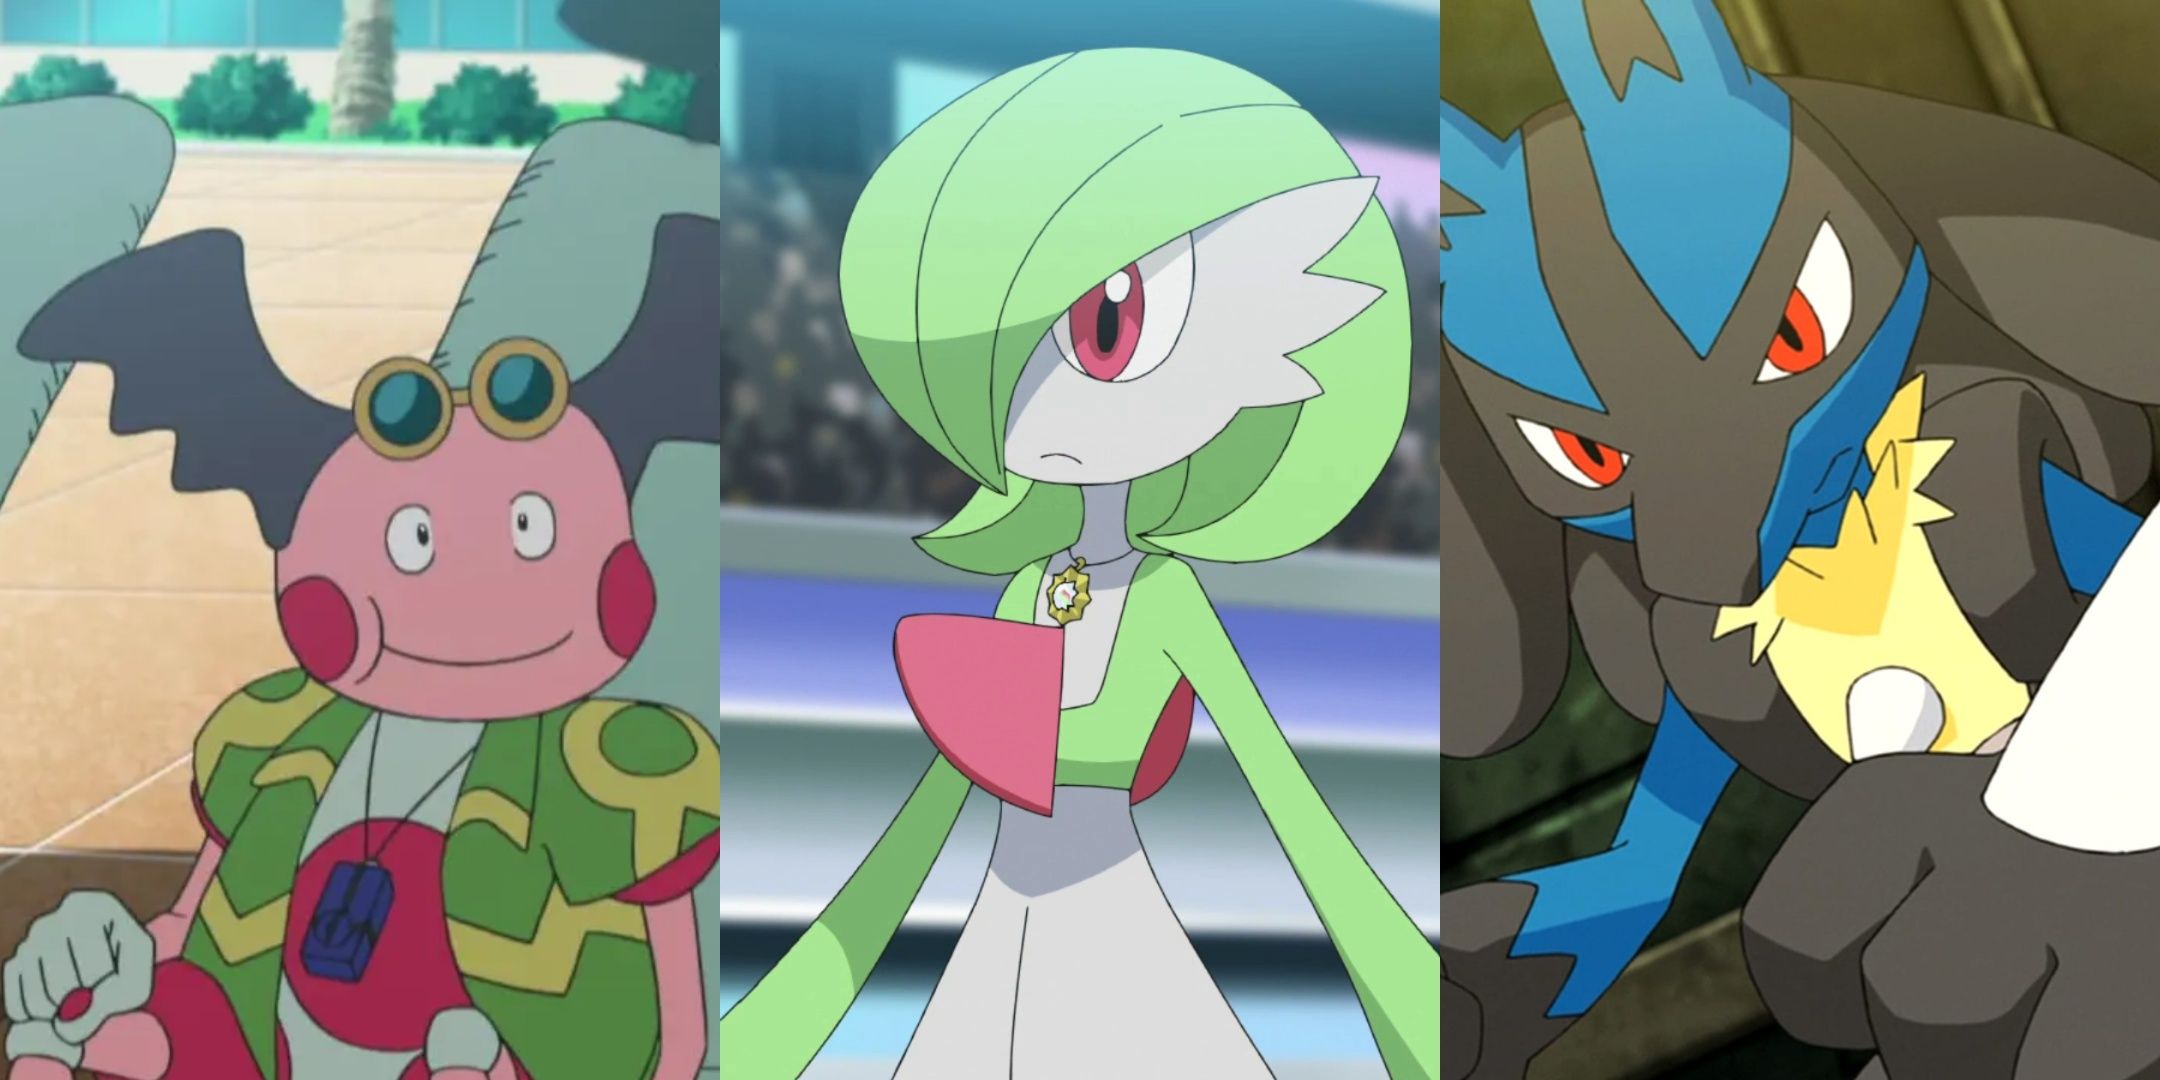 Mr Mime, Gardevoir, and Lucarion from Pokemon